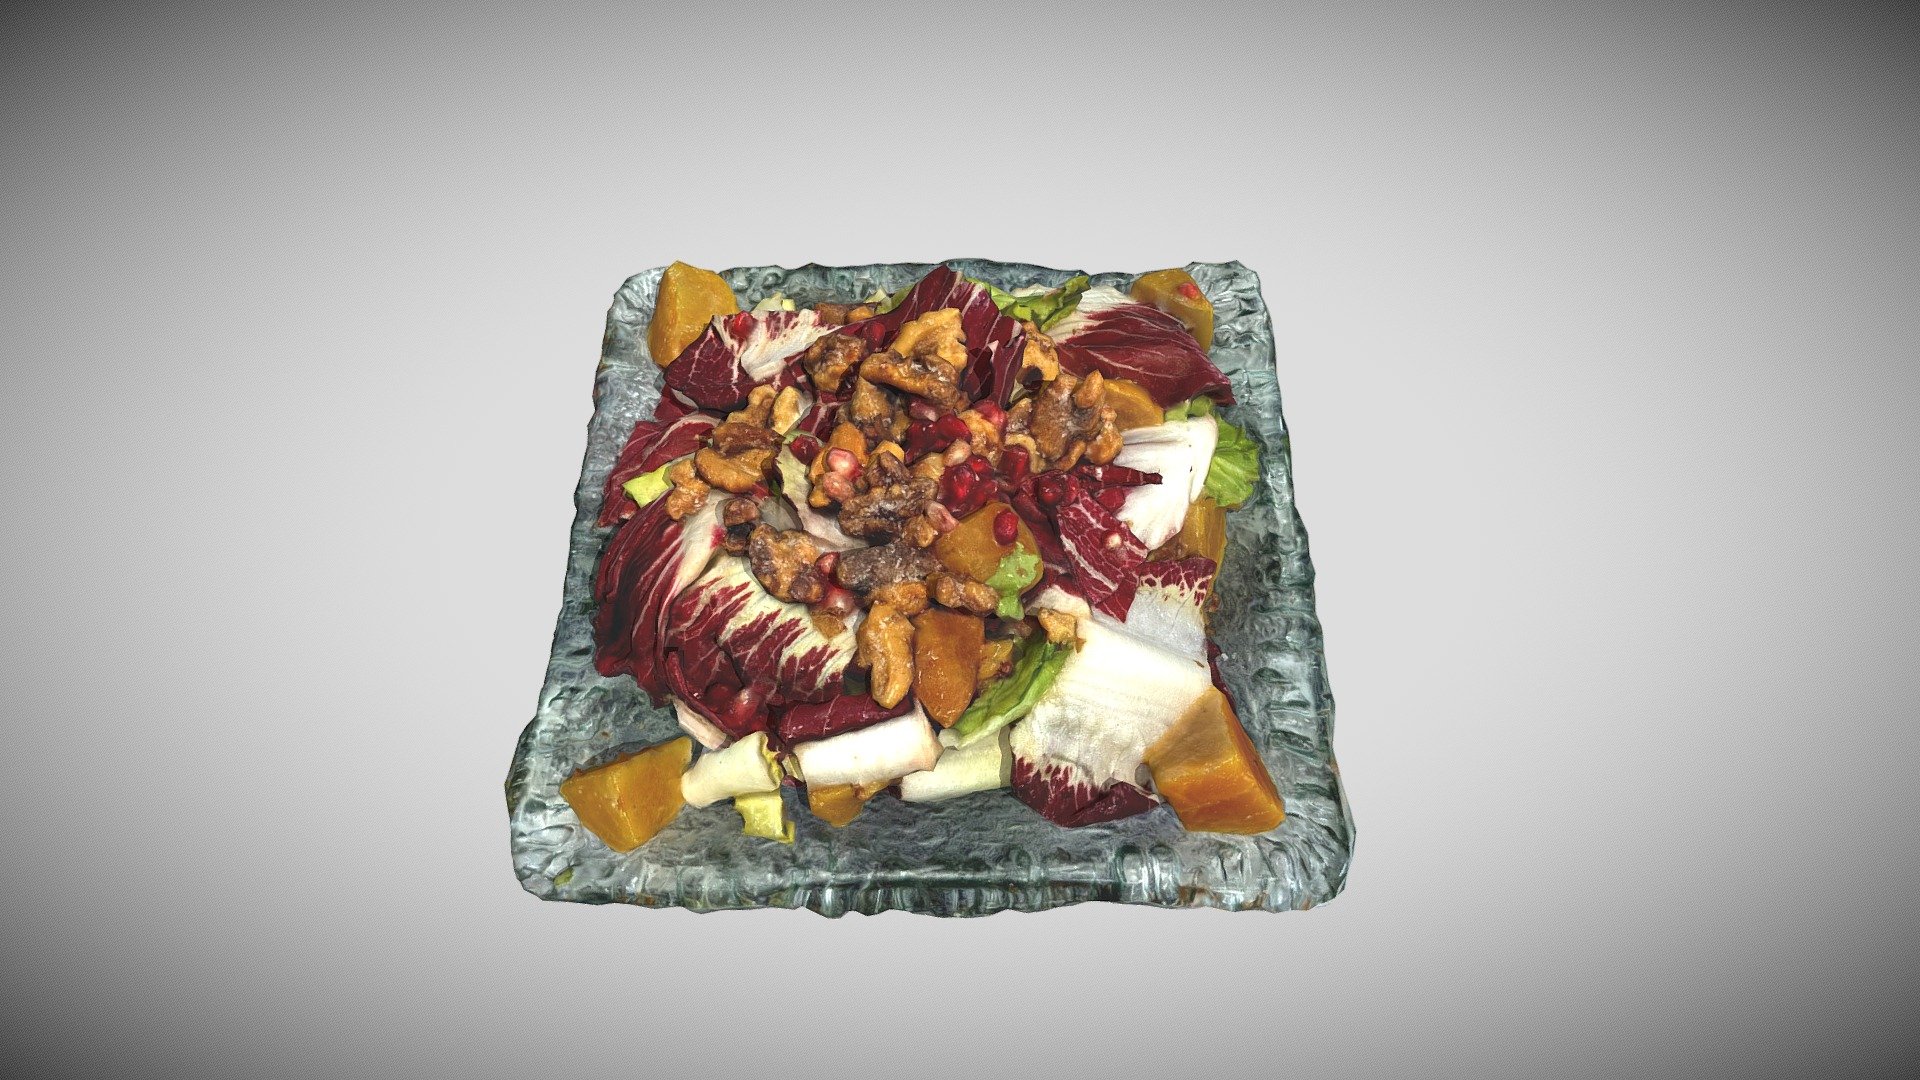 Escarole and Treviso radicchio lettuce | golden beets | radish | pomegranate | candied walnuts | 
cranberry dressing - Copita Winter Salad - Buy Royalty Free 3D model by Augmented Reality Marketing Solutions LLC (@AugRealMarketing) 3d model